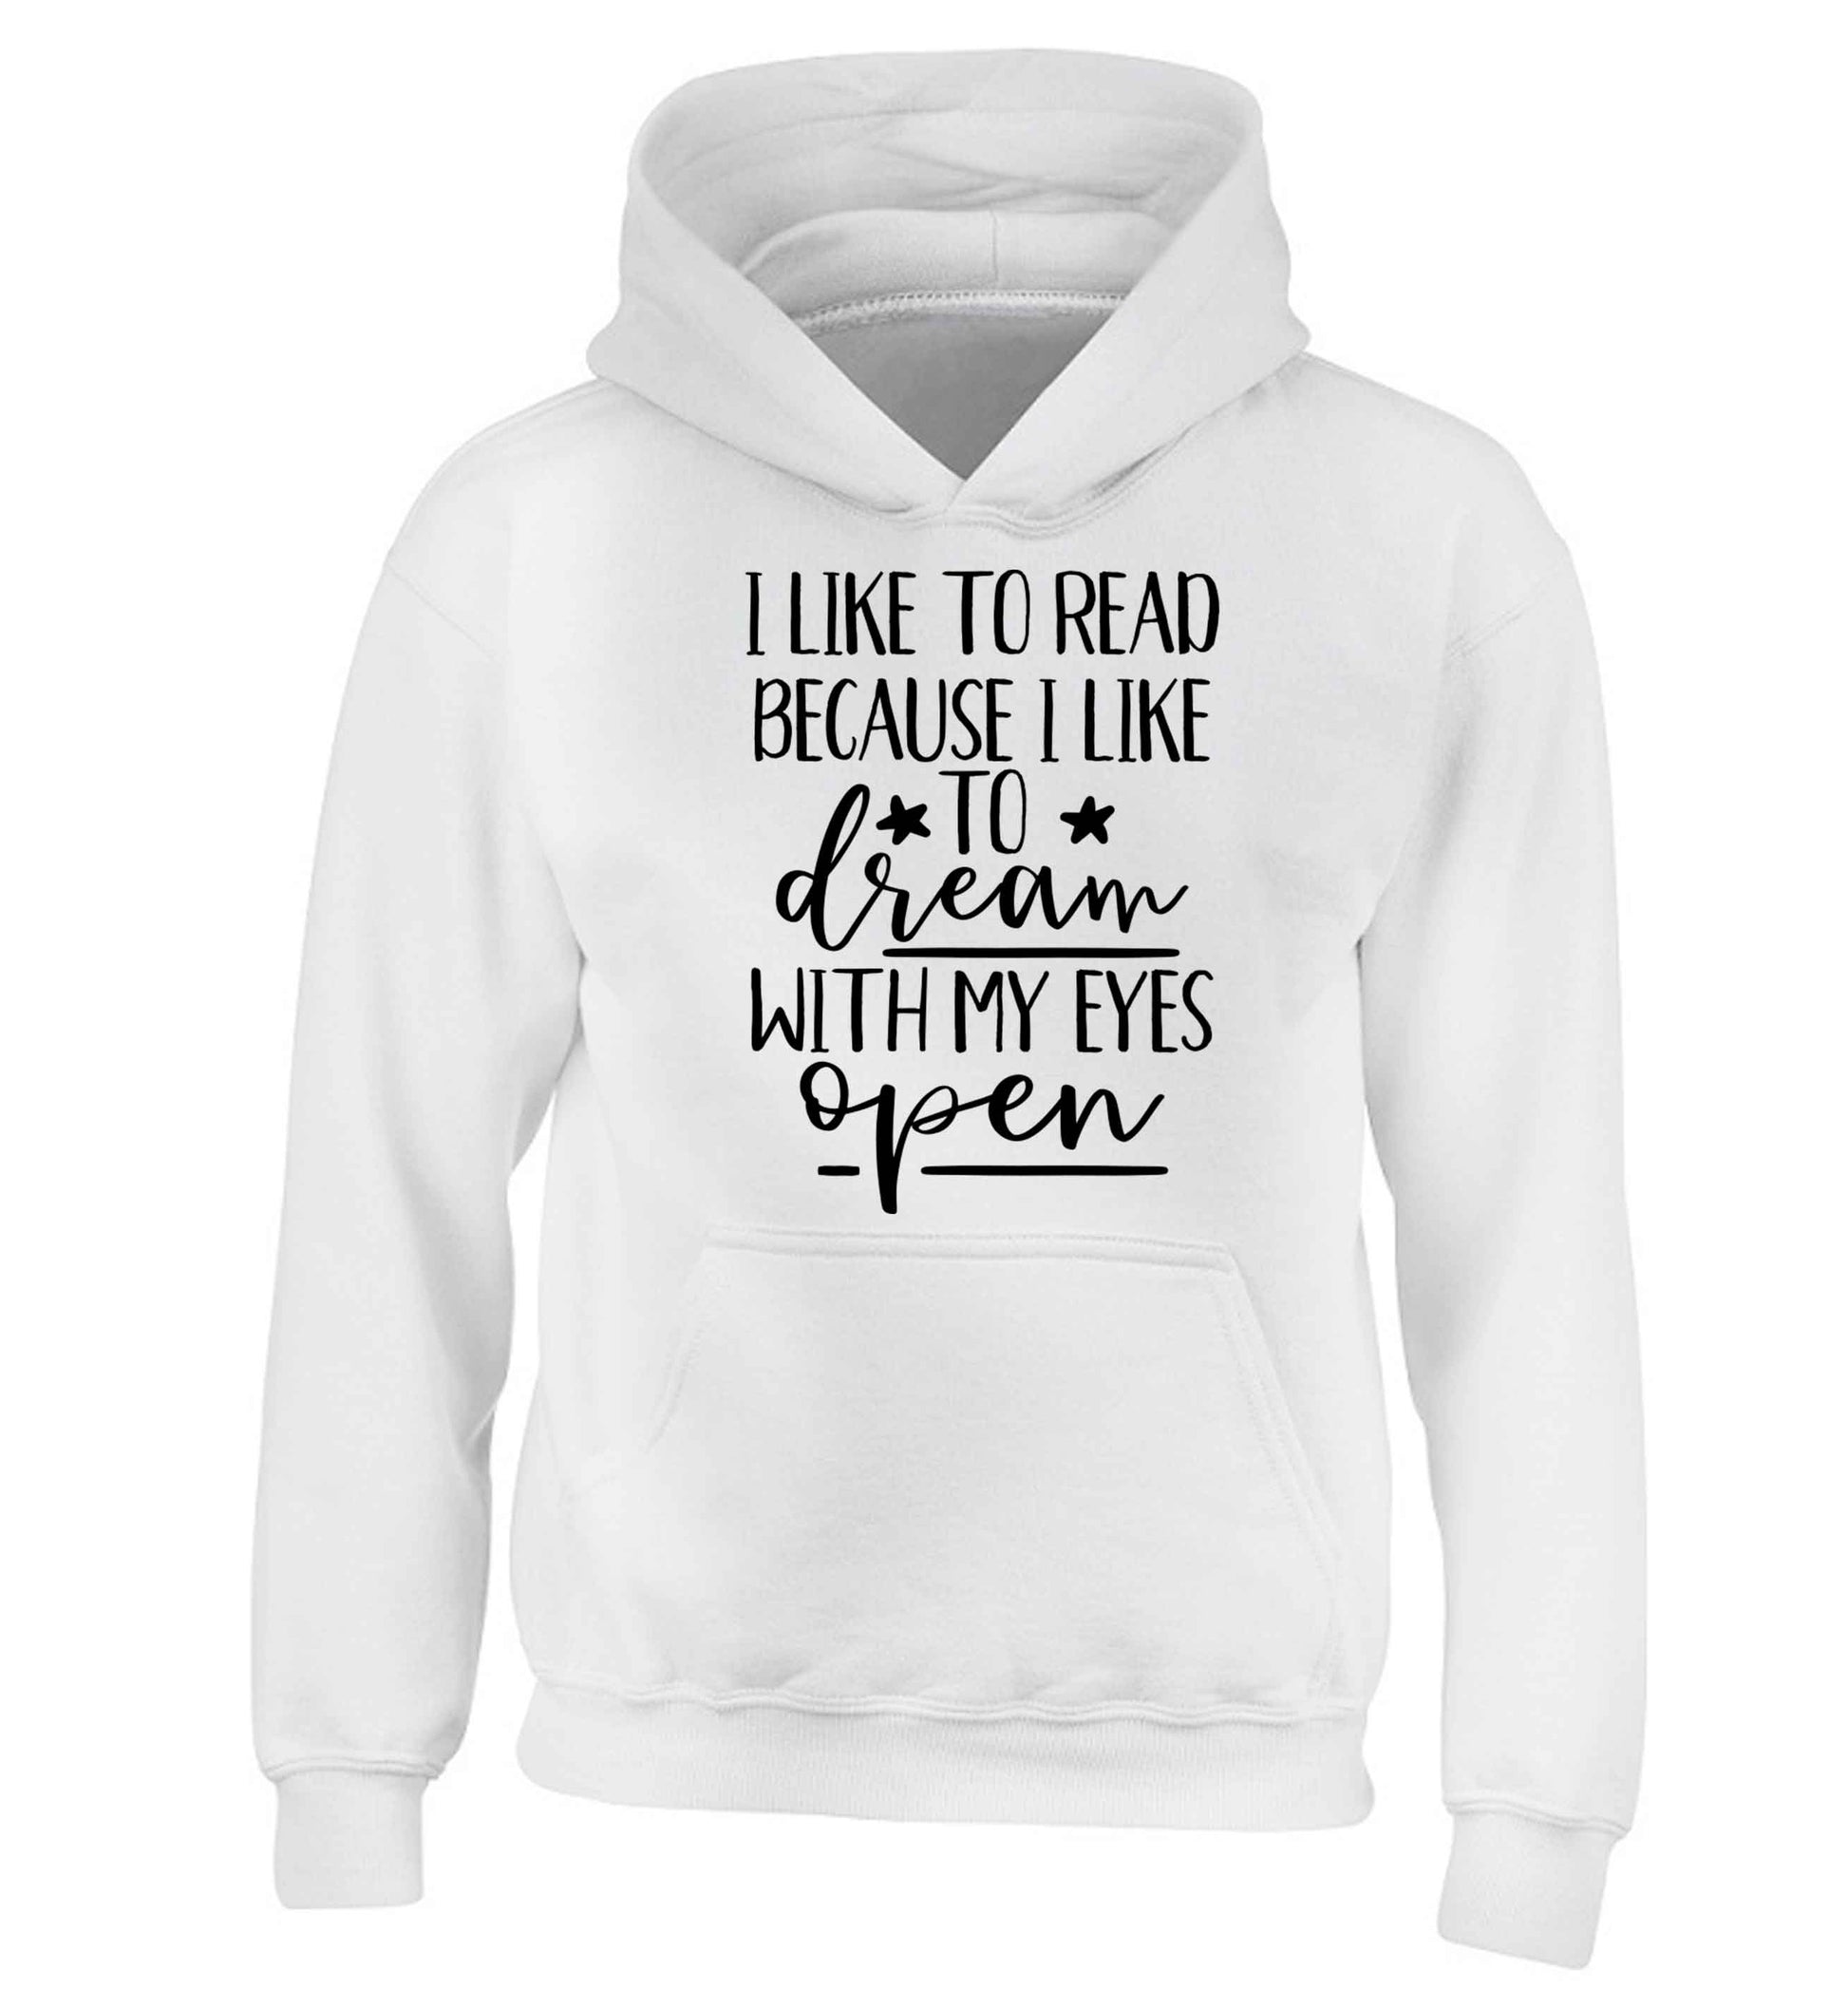 I like to read because I like to dream with my eyes open children's white hoodie 12-13 Years